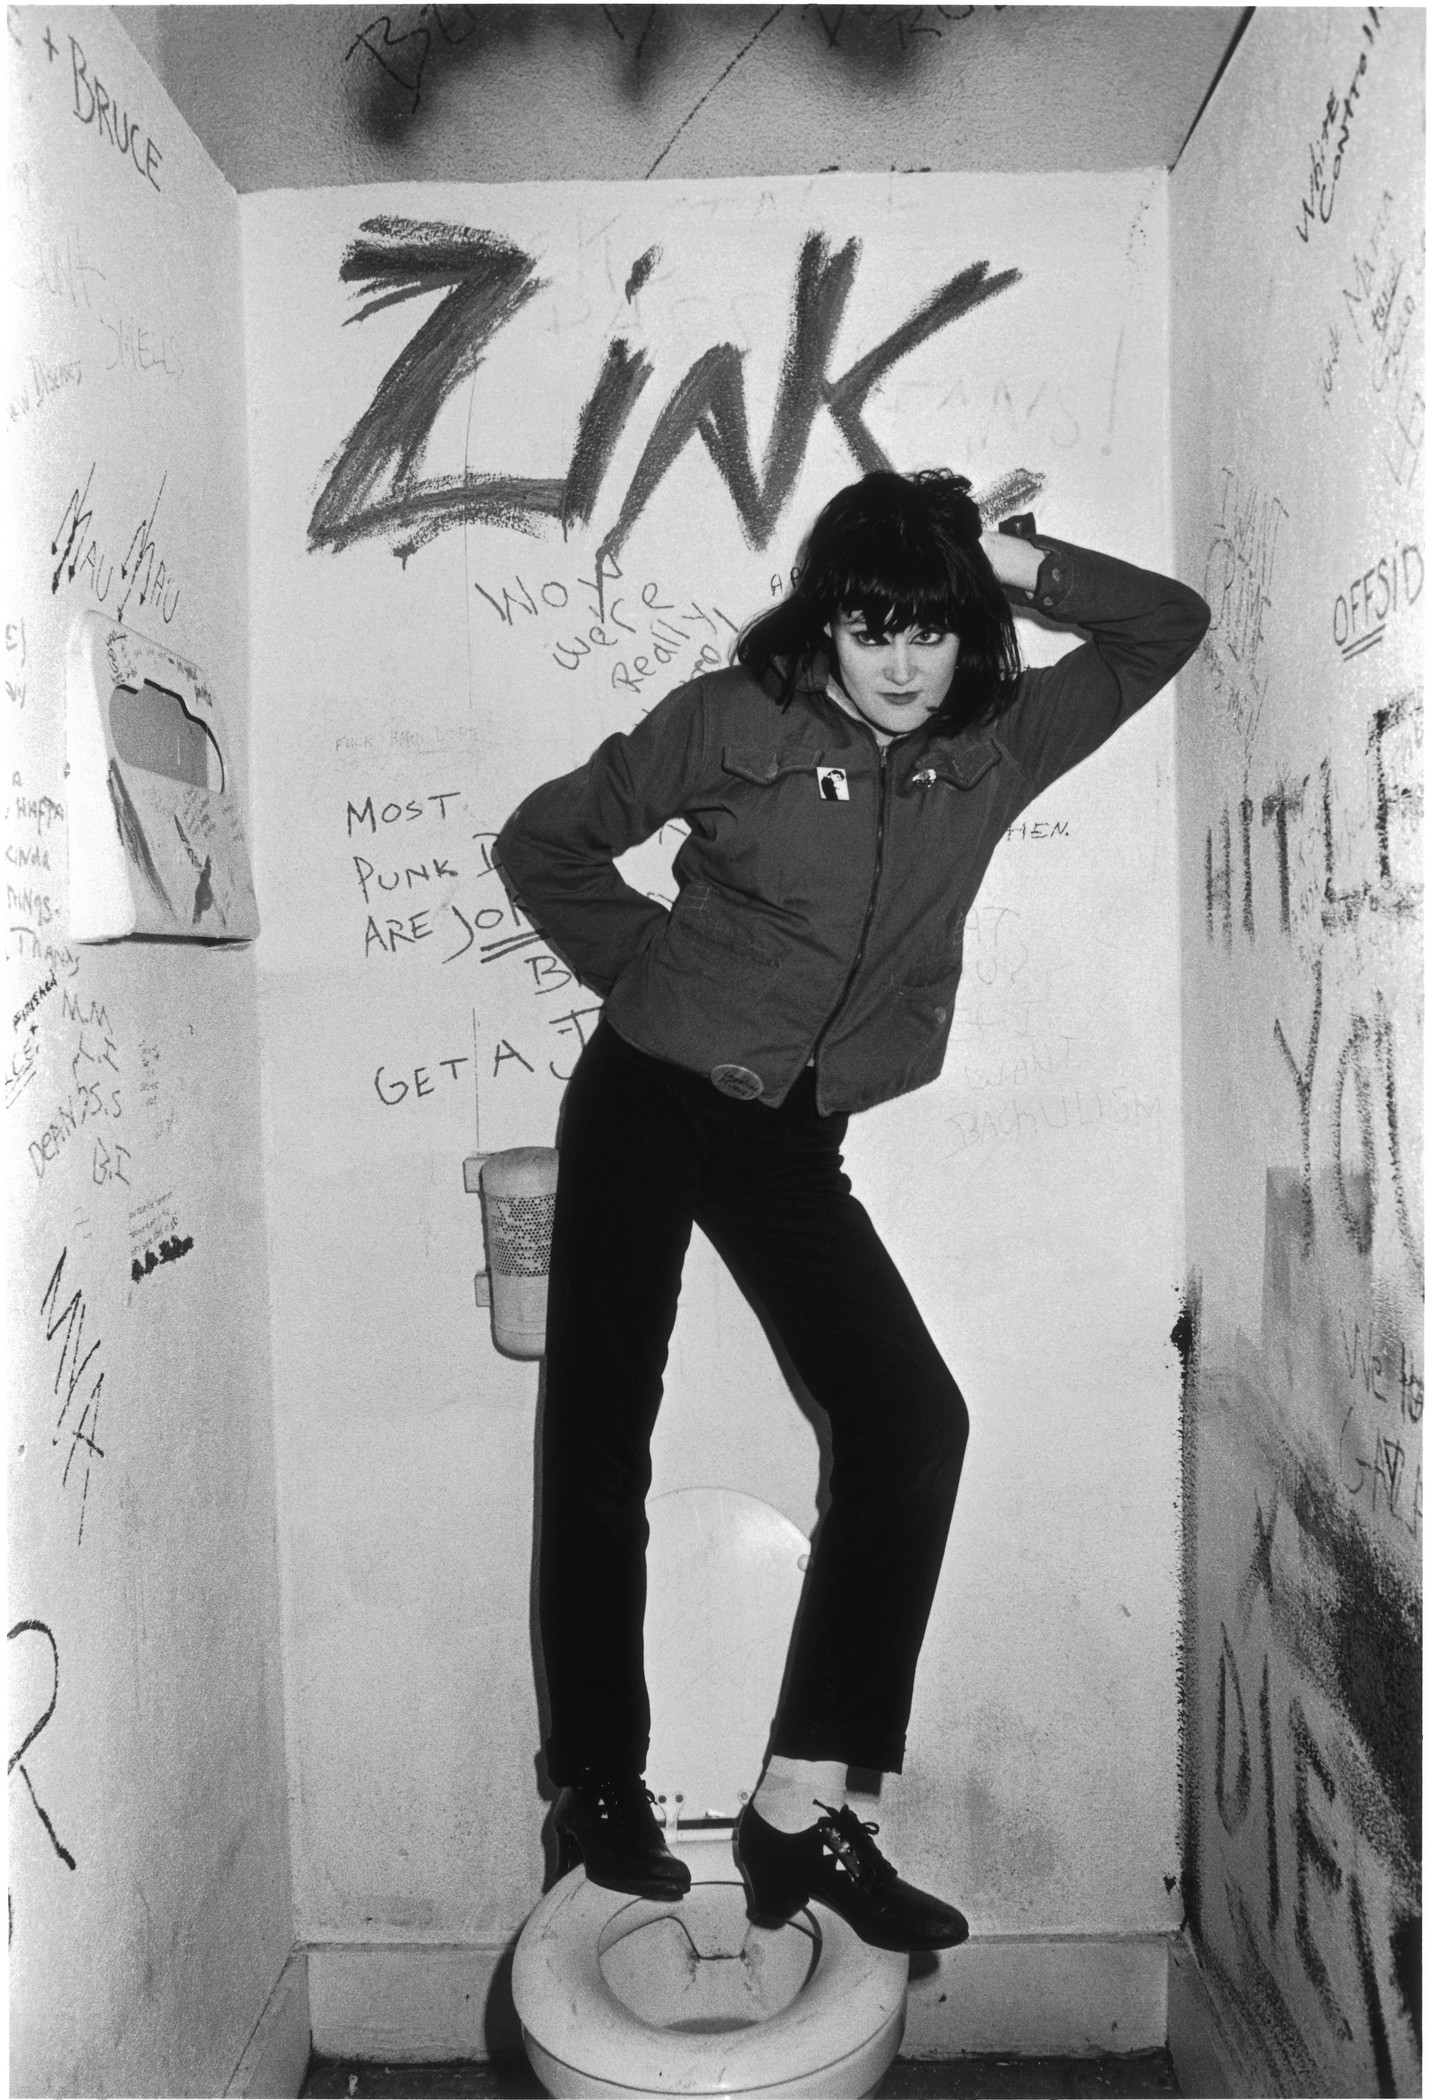 Ann Summa, Exene Cervenka Of X, In The Ladies' Room At The Masque, 1979, Los Angeles County Museum of Art, purchased with funds provided by Lynda and Robert Shapiro, © Ann Summa, photo courtesy of the artist